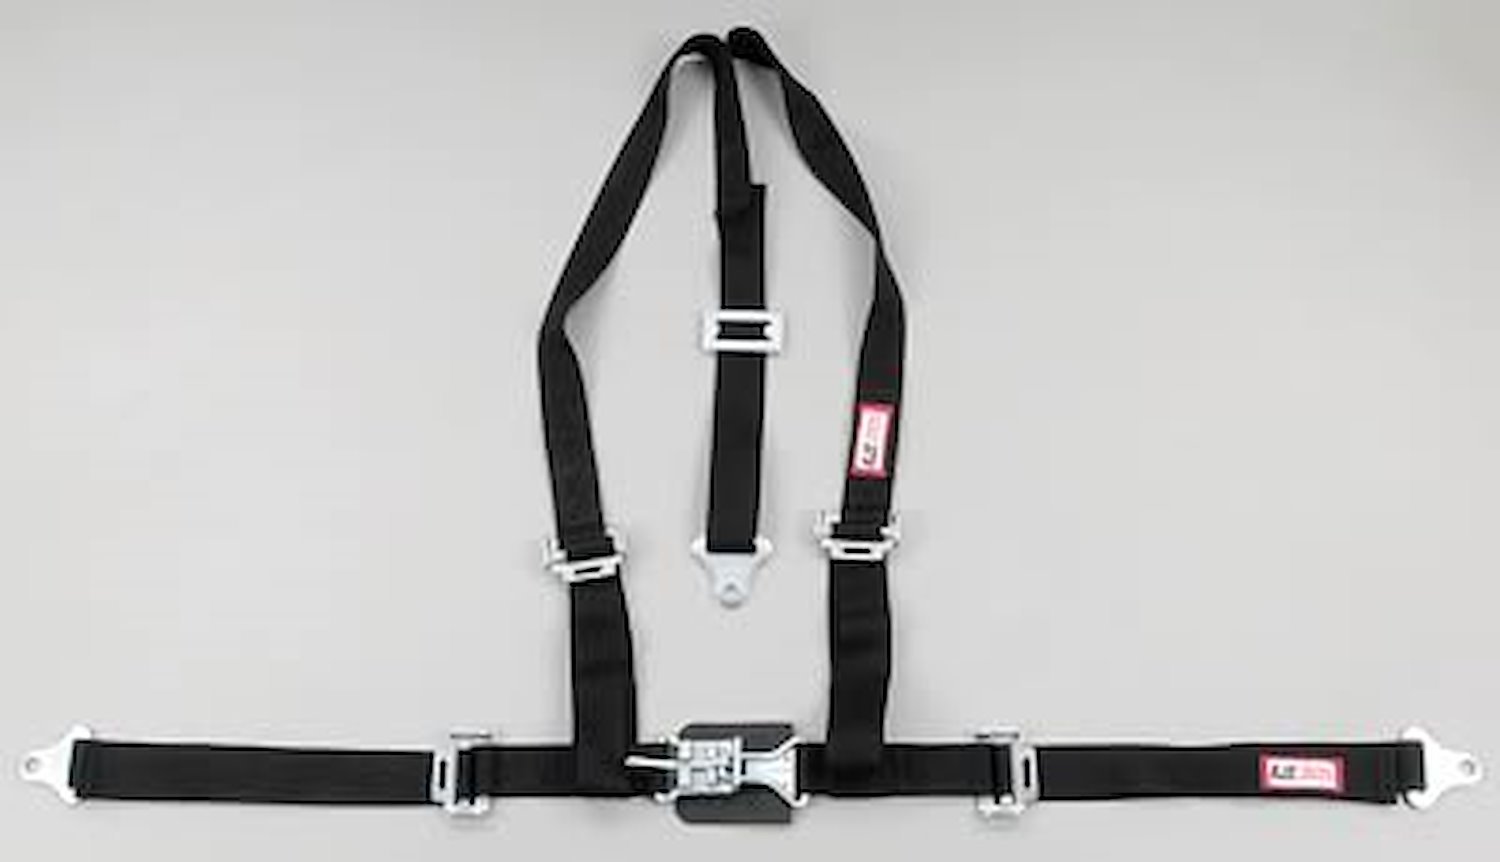 NON-SFI L&L HARNESS 3 PULL UP Lap Belt SNAP SEWN IN 2 S.H. Individual FLOOR Mount WRAP/BOLT ORANGE